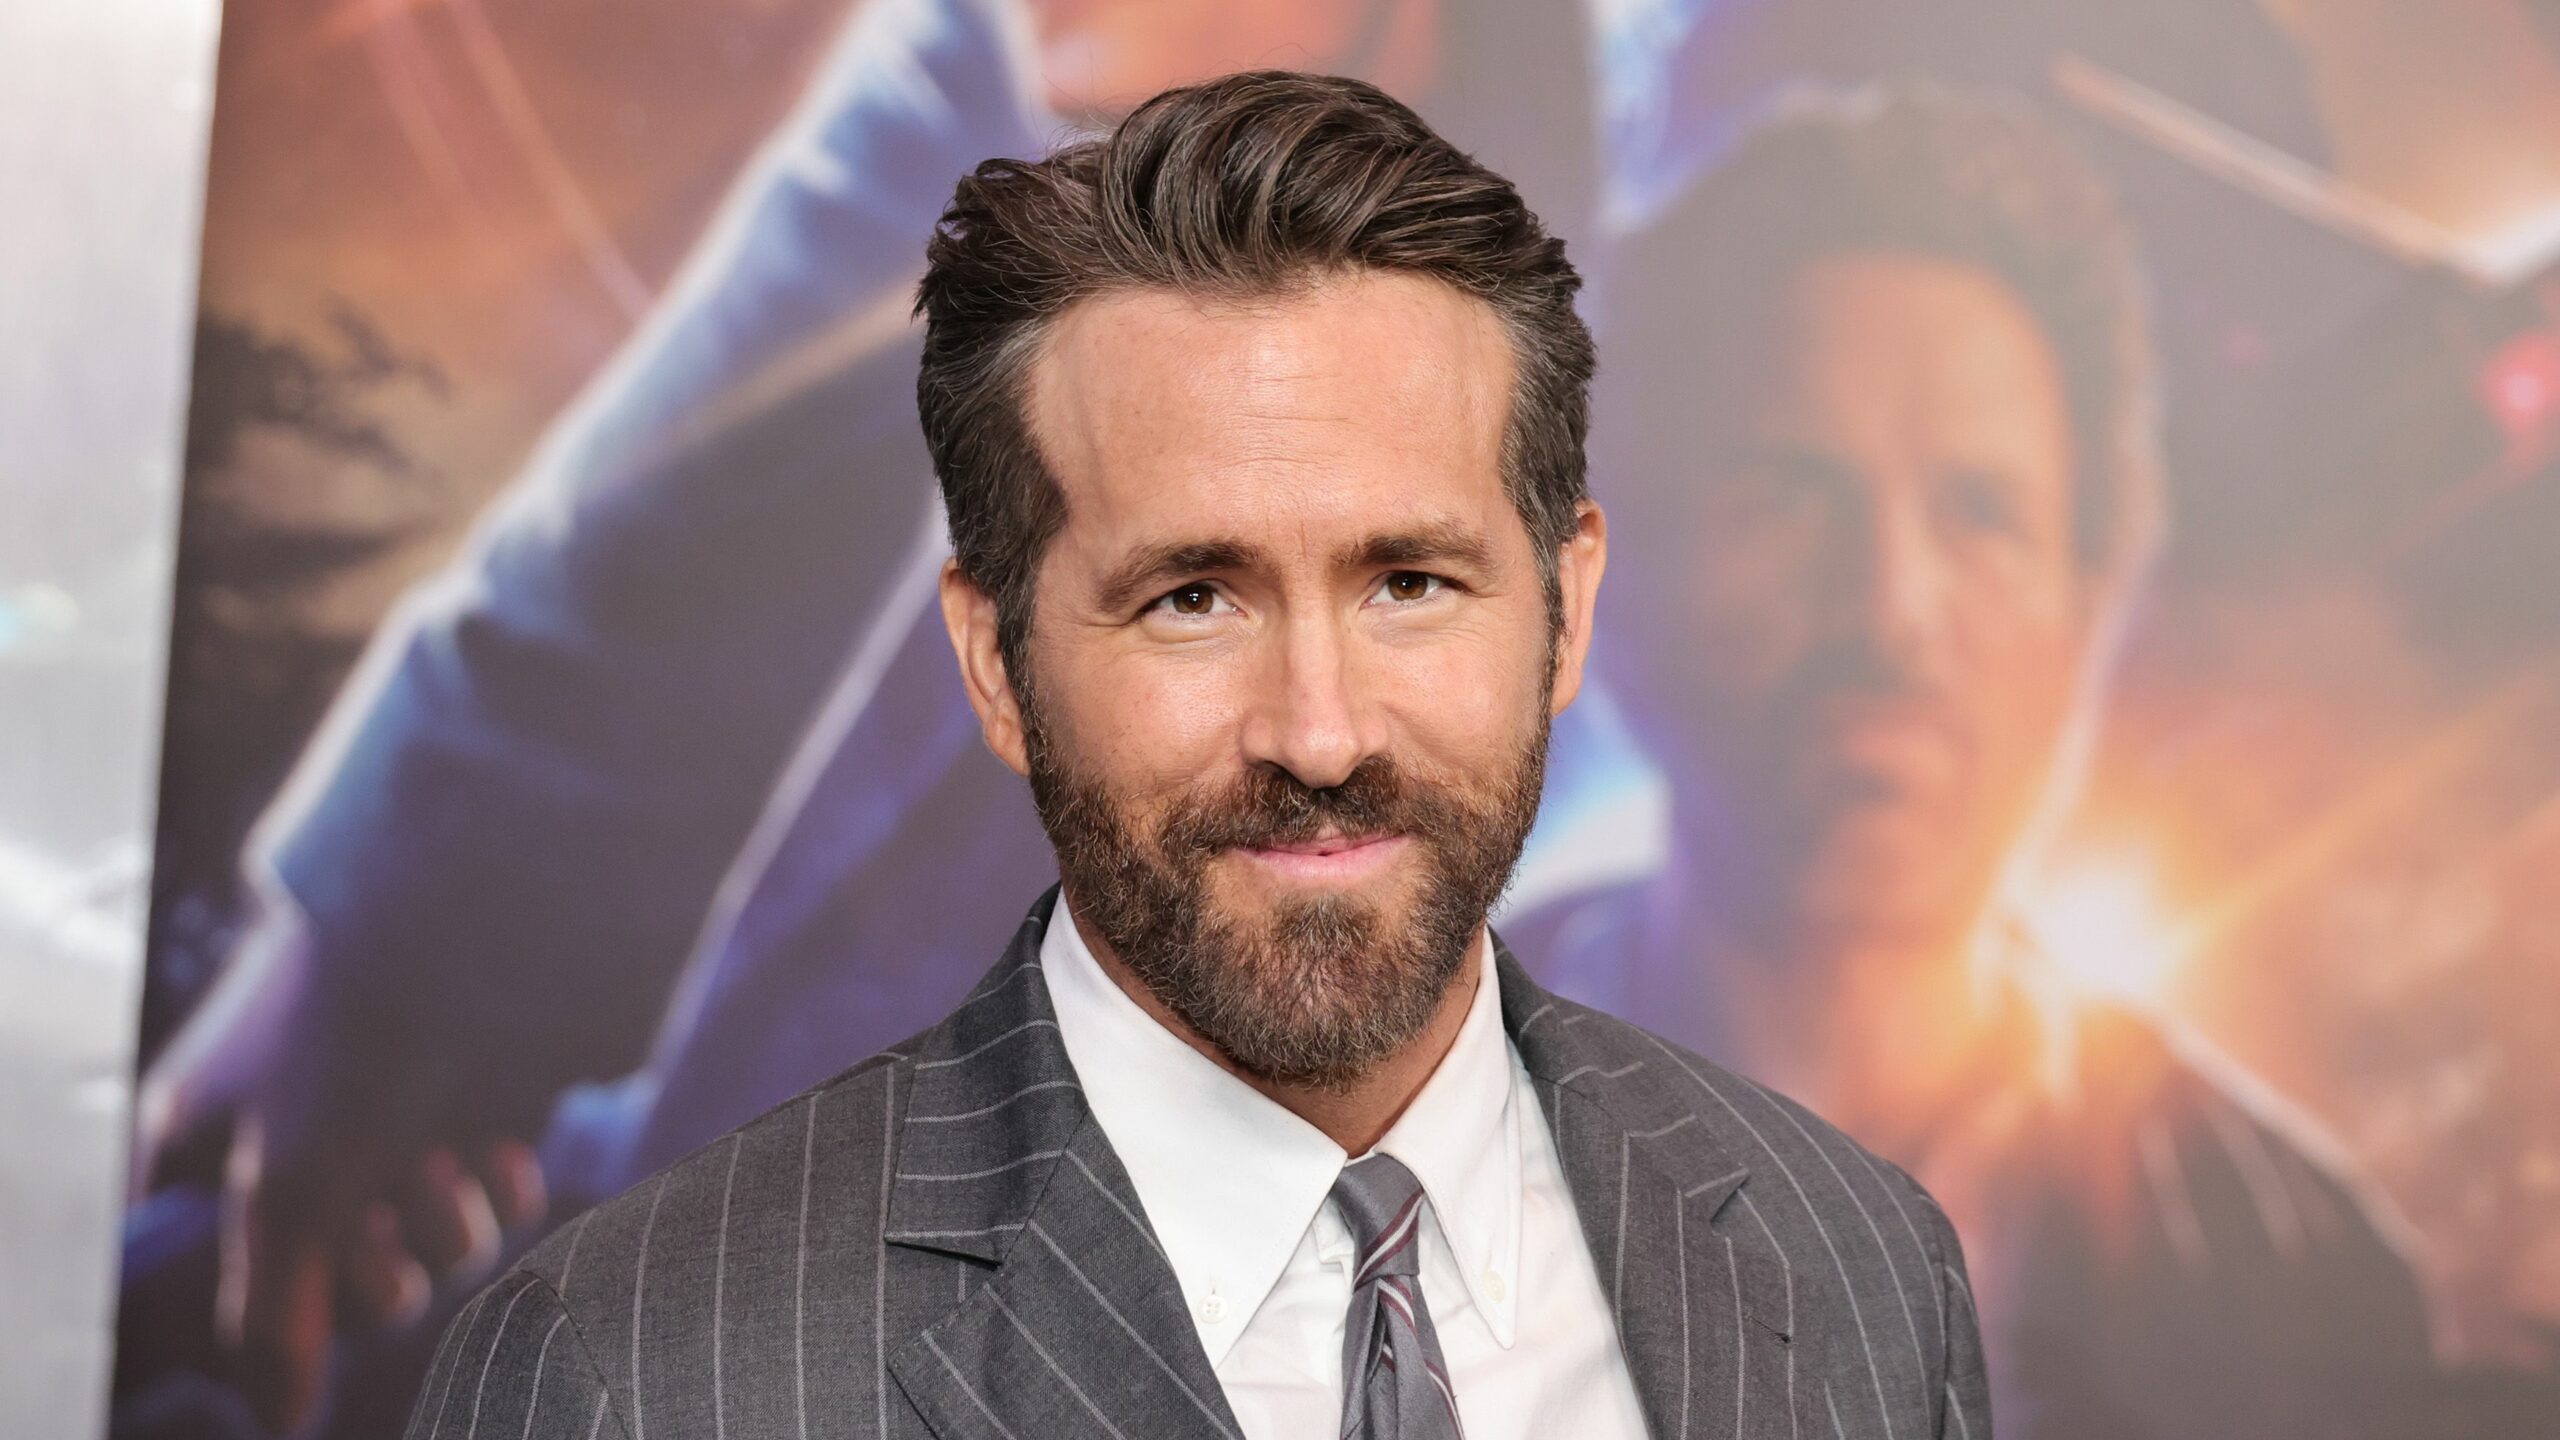 Ryan Reynolds’ Epic Stare-Down: Could He Outlast Hugh Jackman in Their Next Big Movie?